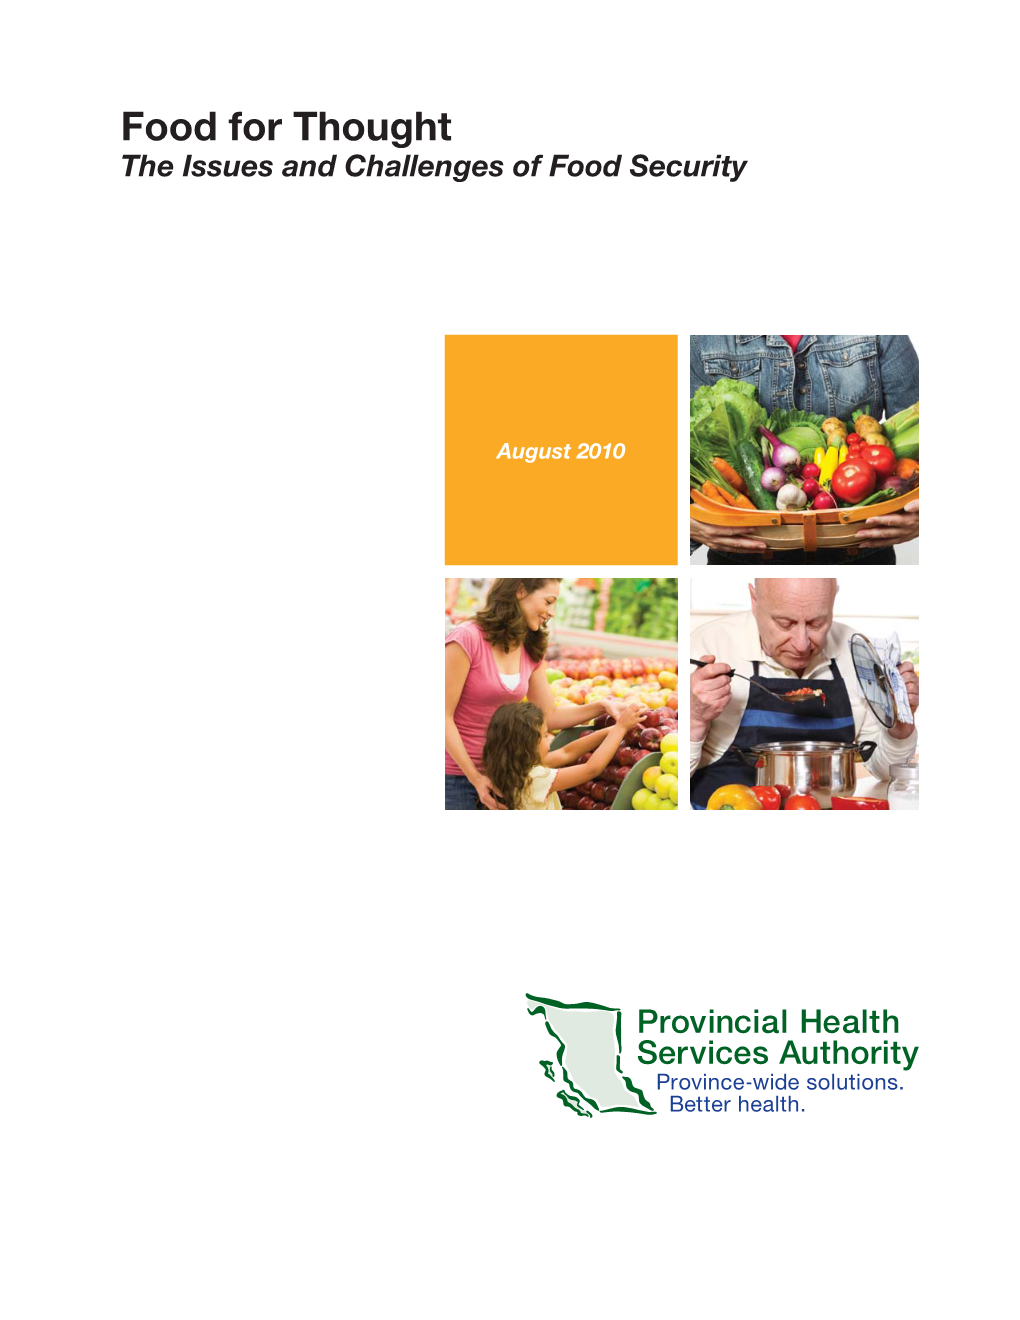 Food for Thought the Issues and Challenges of Food Security